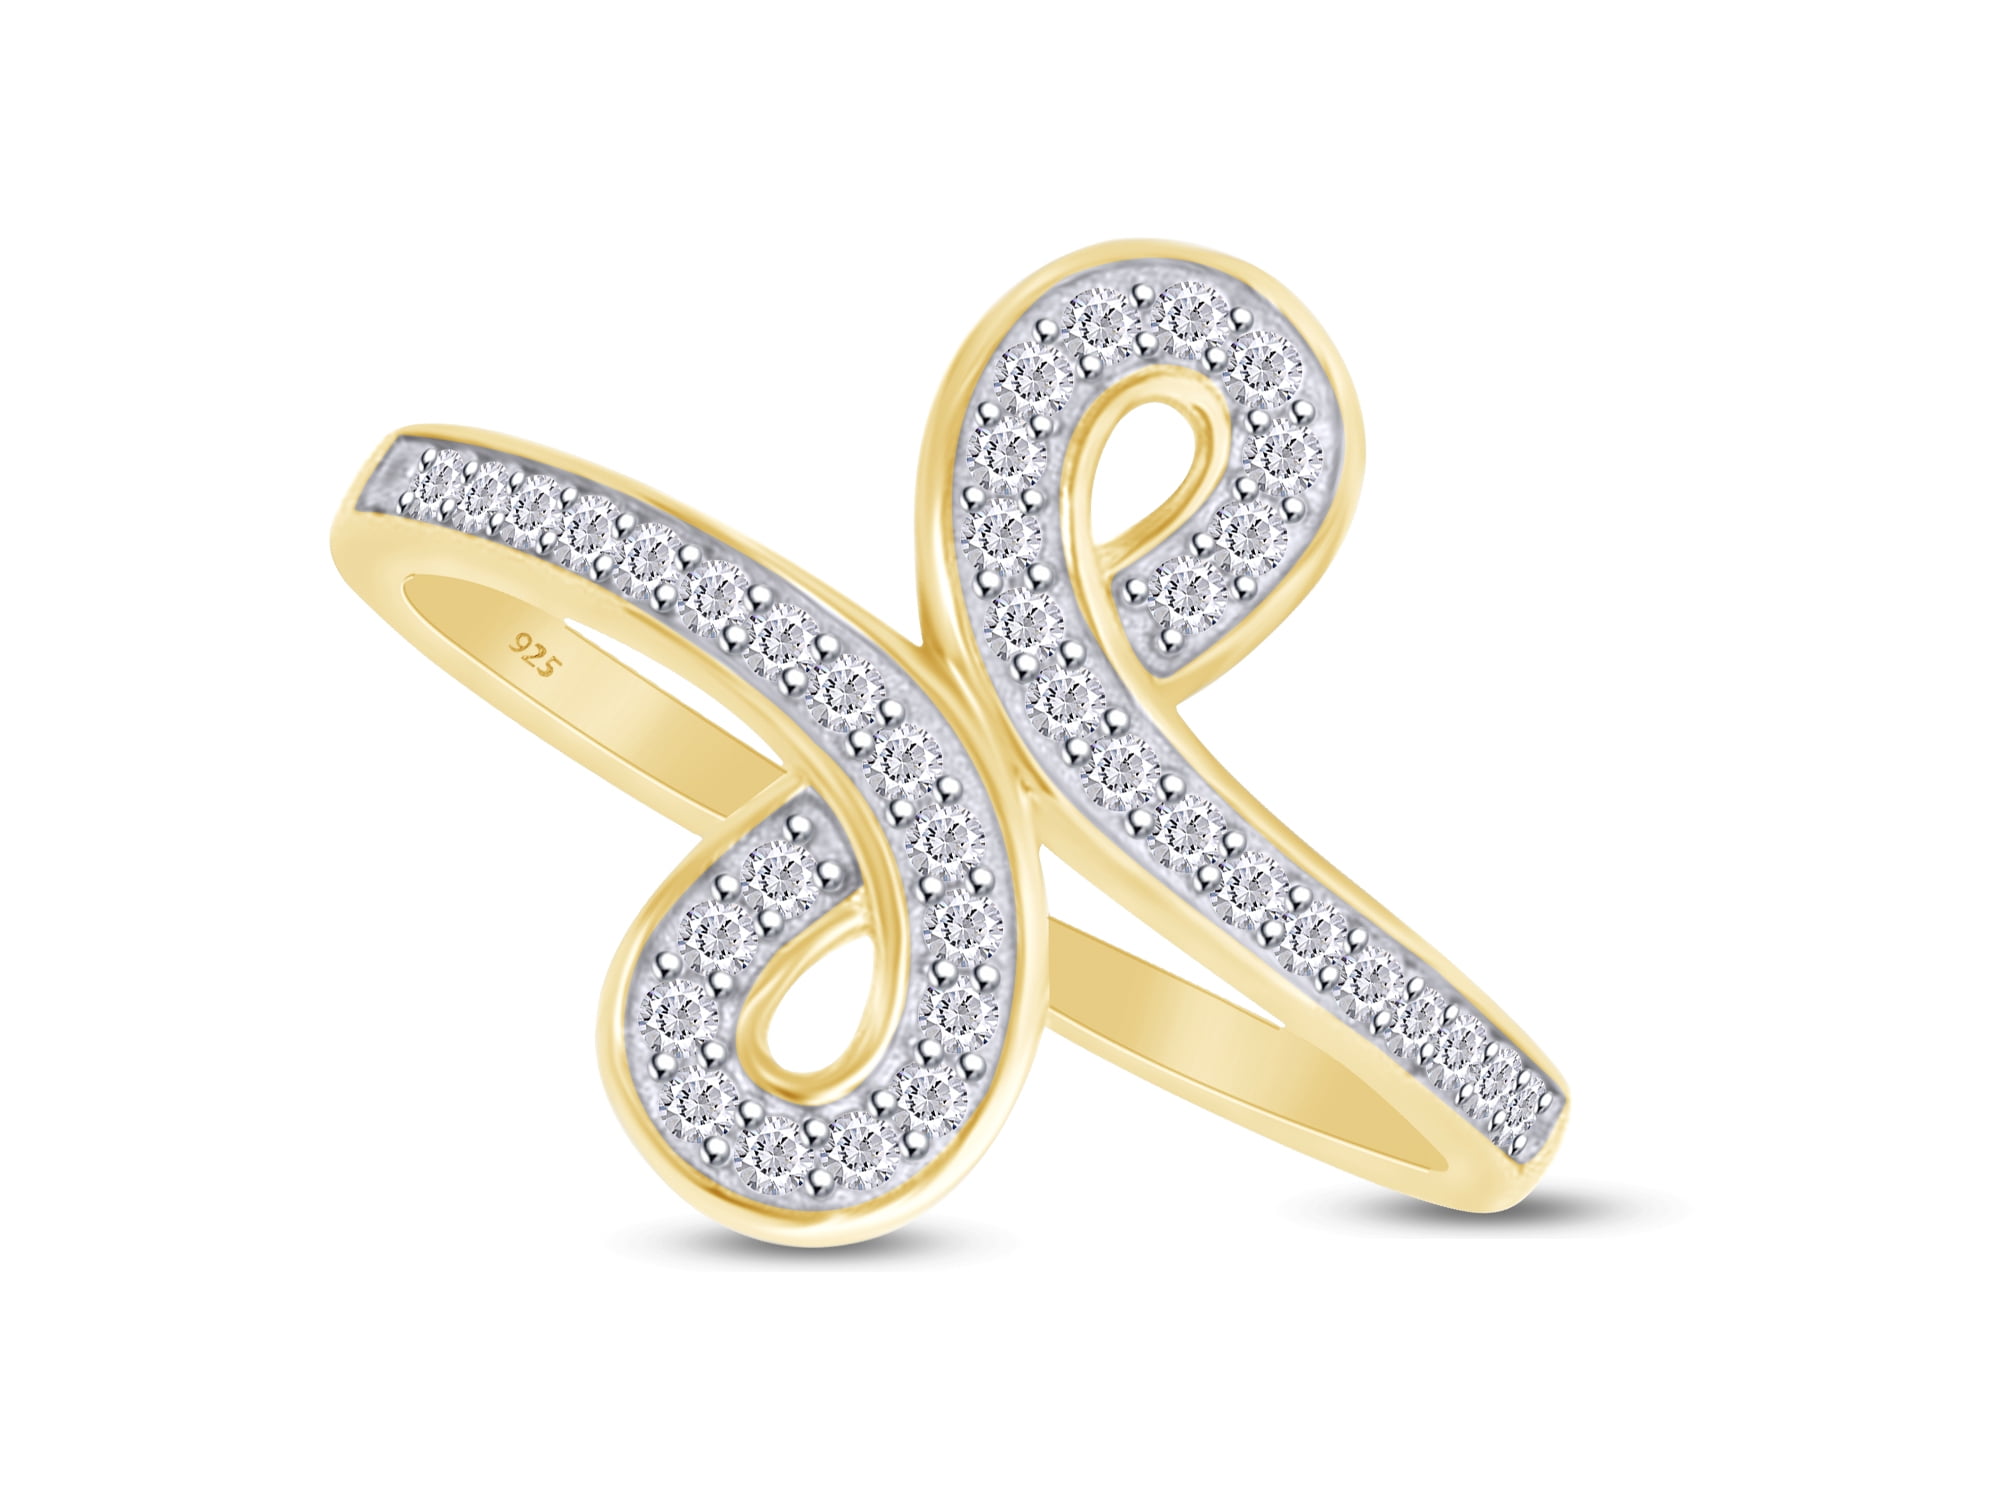 Wishrocks Round Cut White Cubic Zirconia Engagement Ring in 14K Yellow Gold Over Sterling Silver 